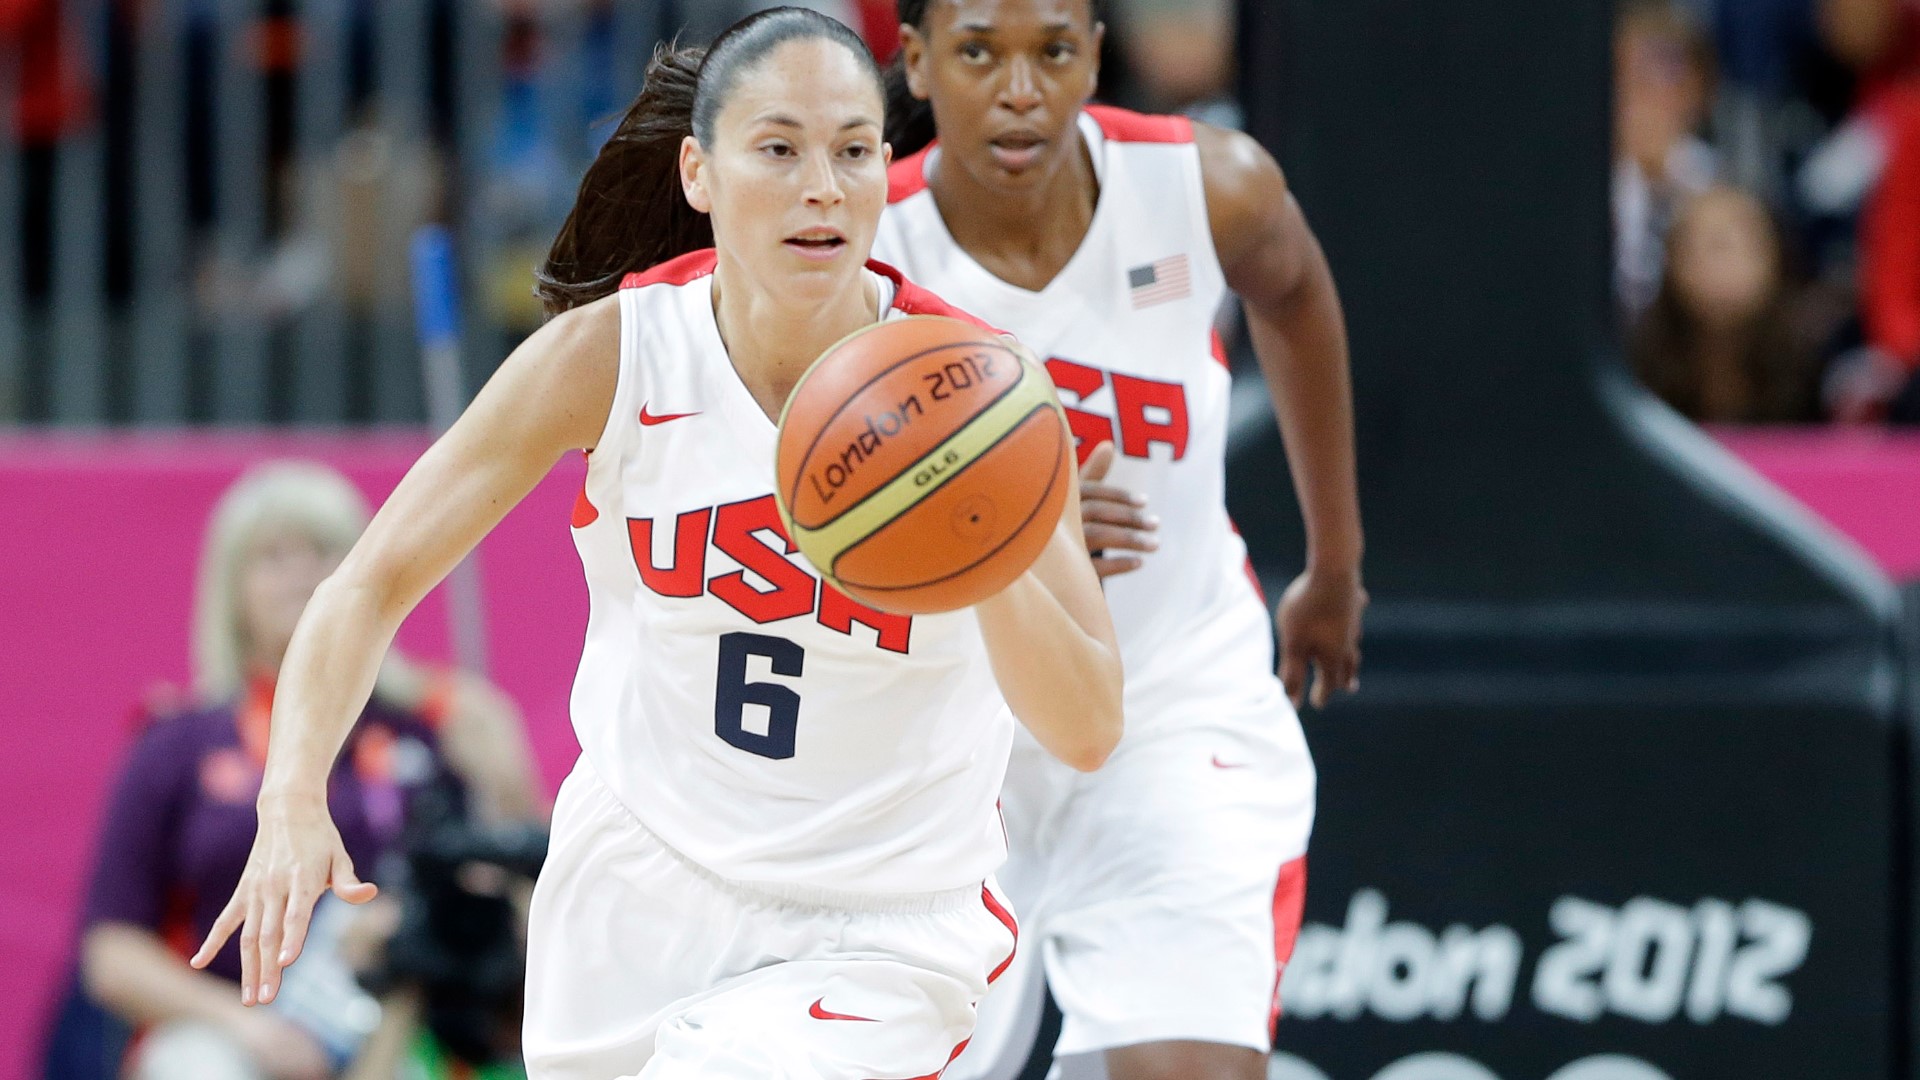 There is no individual or team more dominant at the Olympics than the U.S. Women's Basketball Team as they go for a seventh straight gold medal